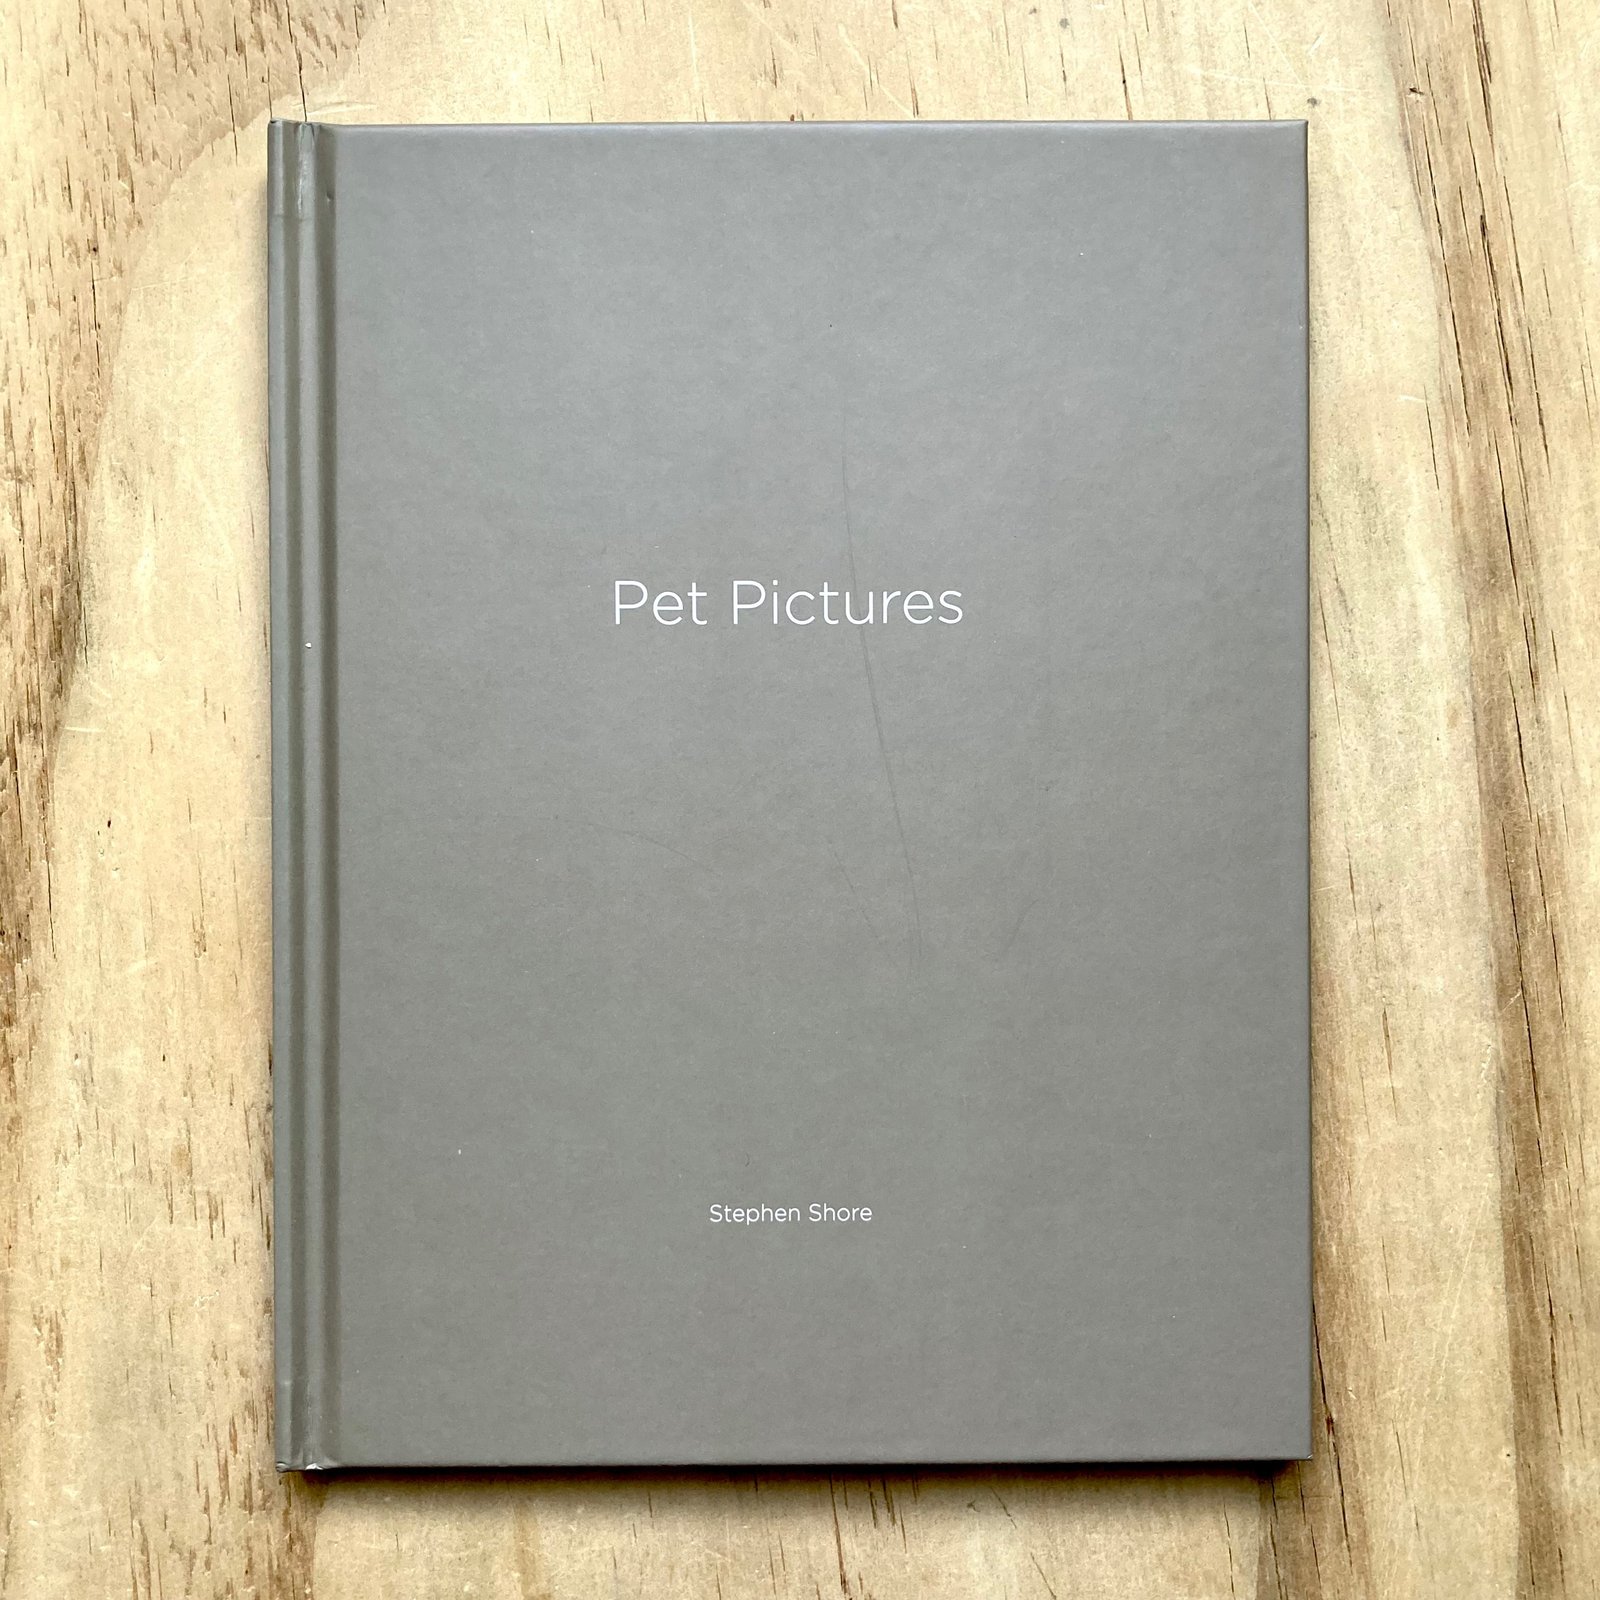 Stephen Shore - Pet Pictures (w/signed print)